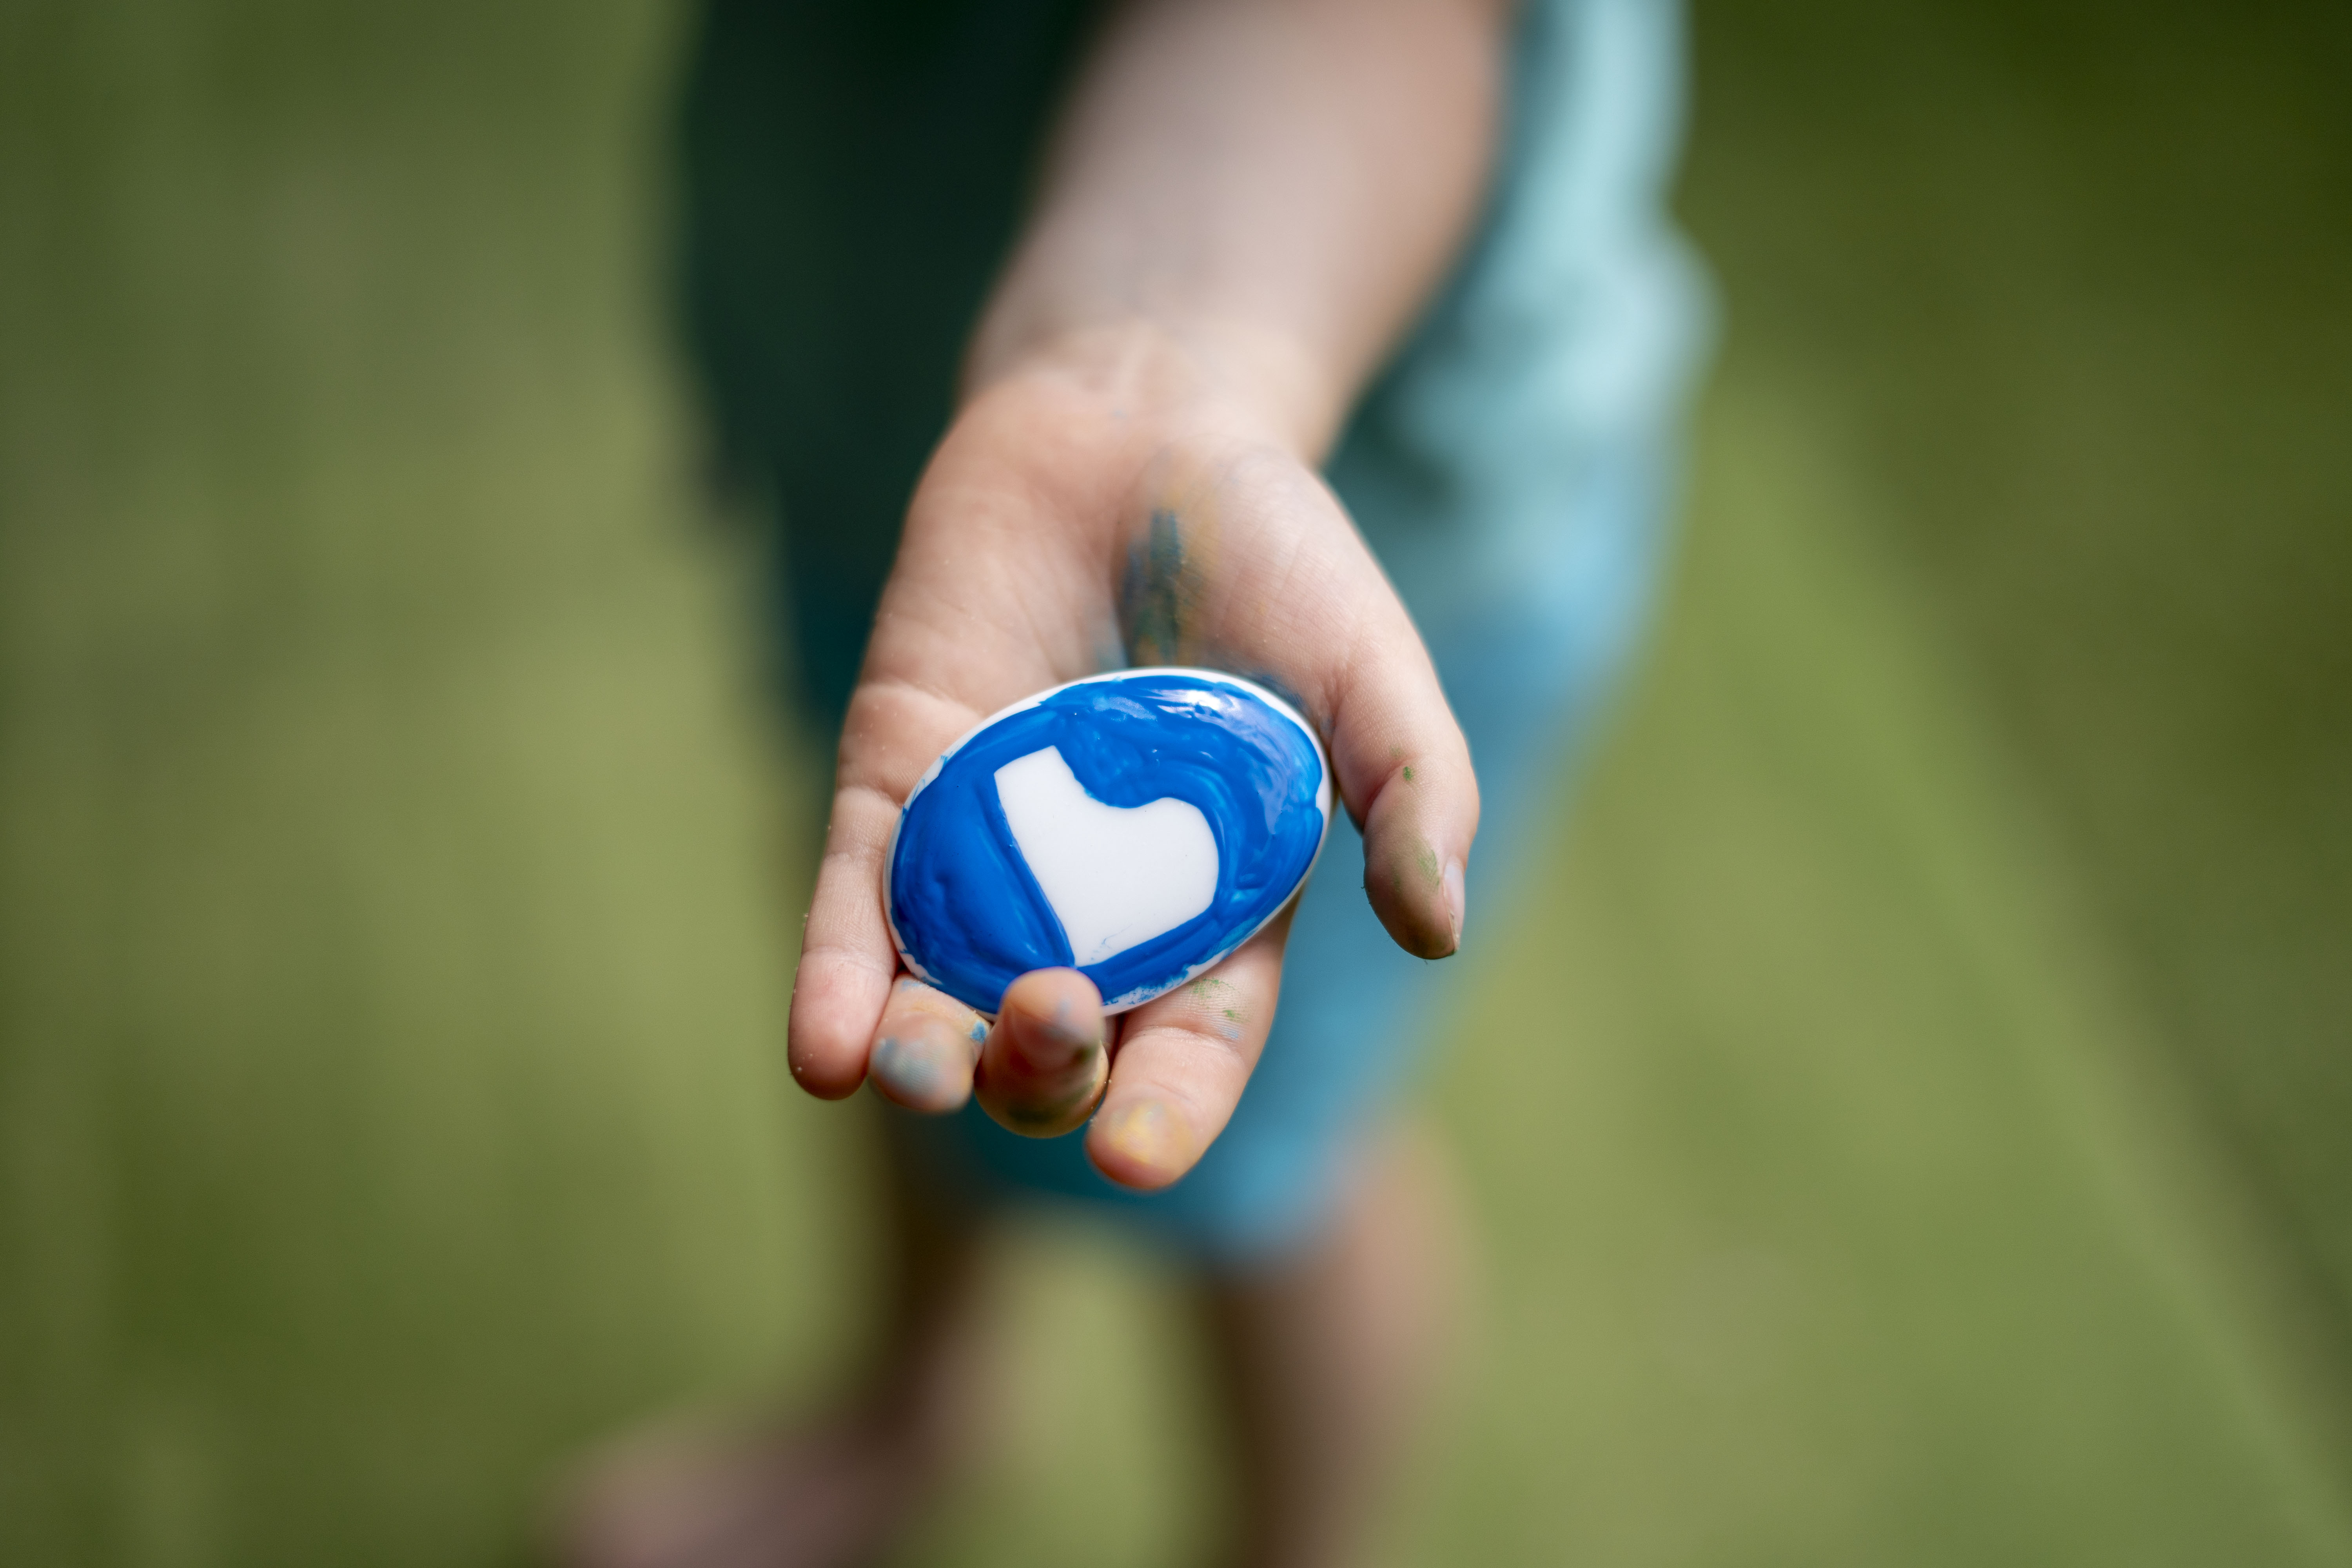 A child's hand holding a rock that has been painted blue with a white letter b in the centre.